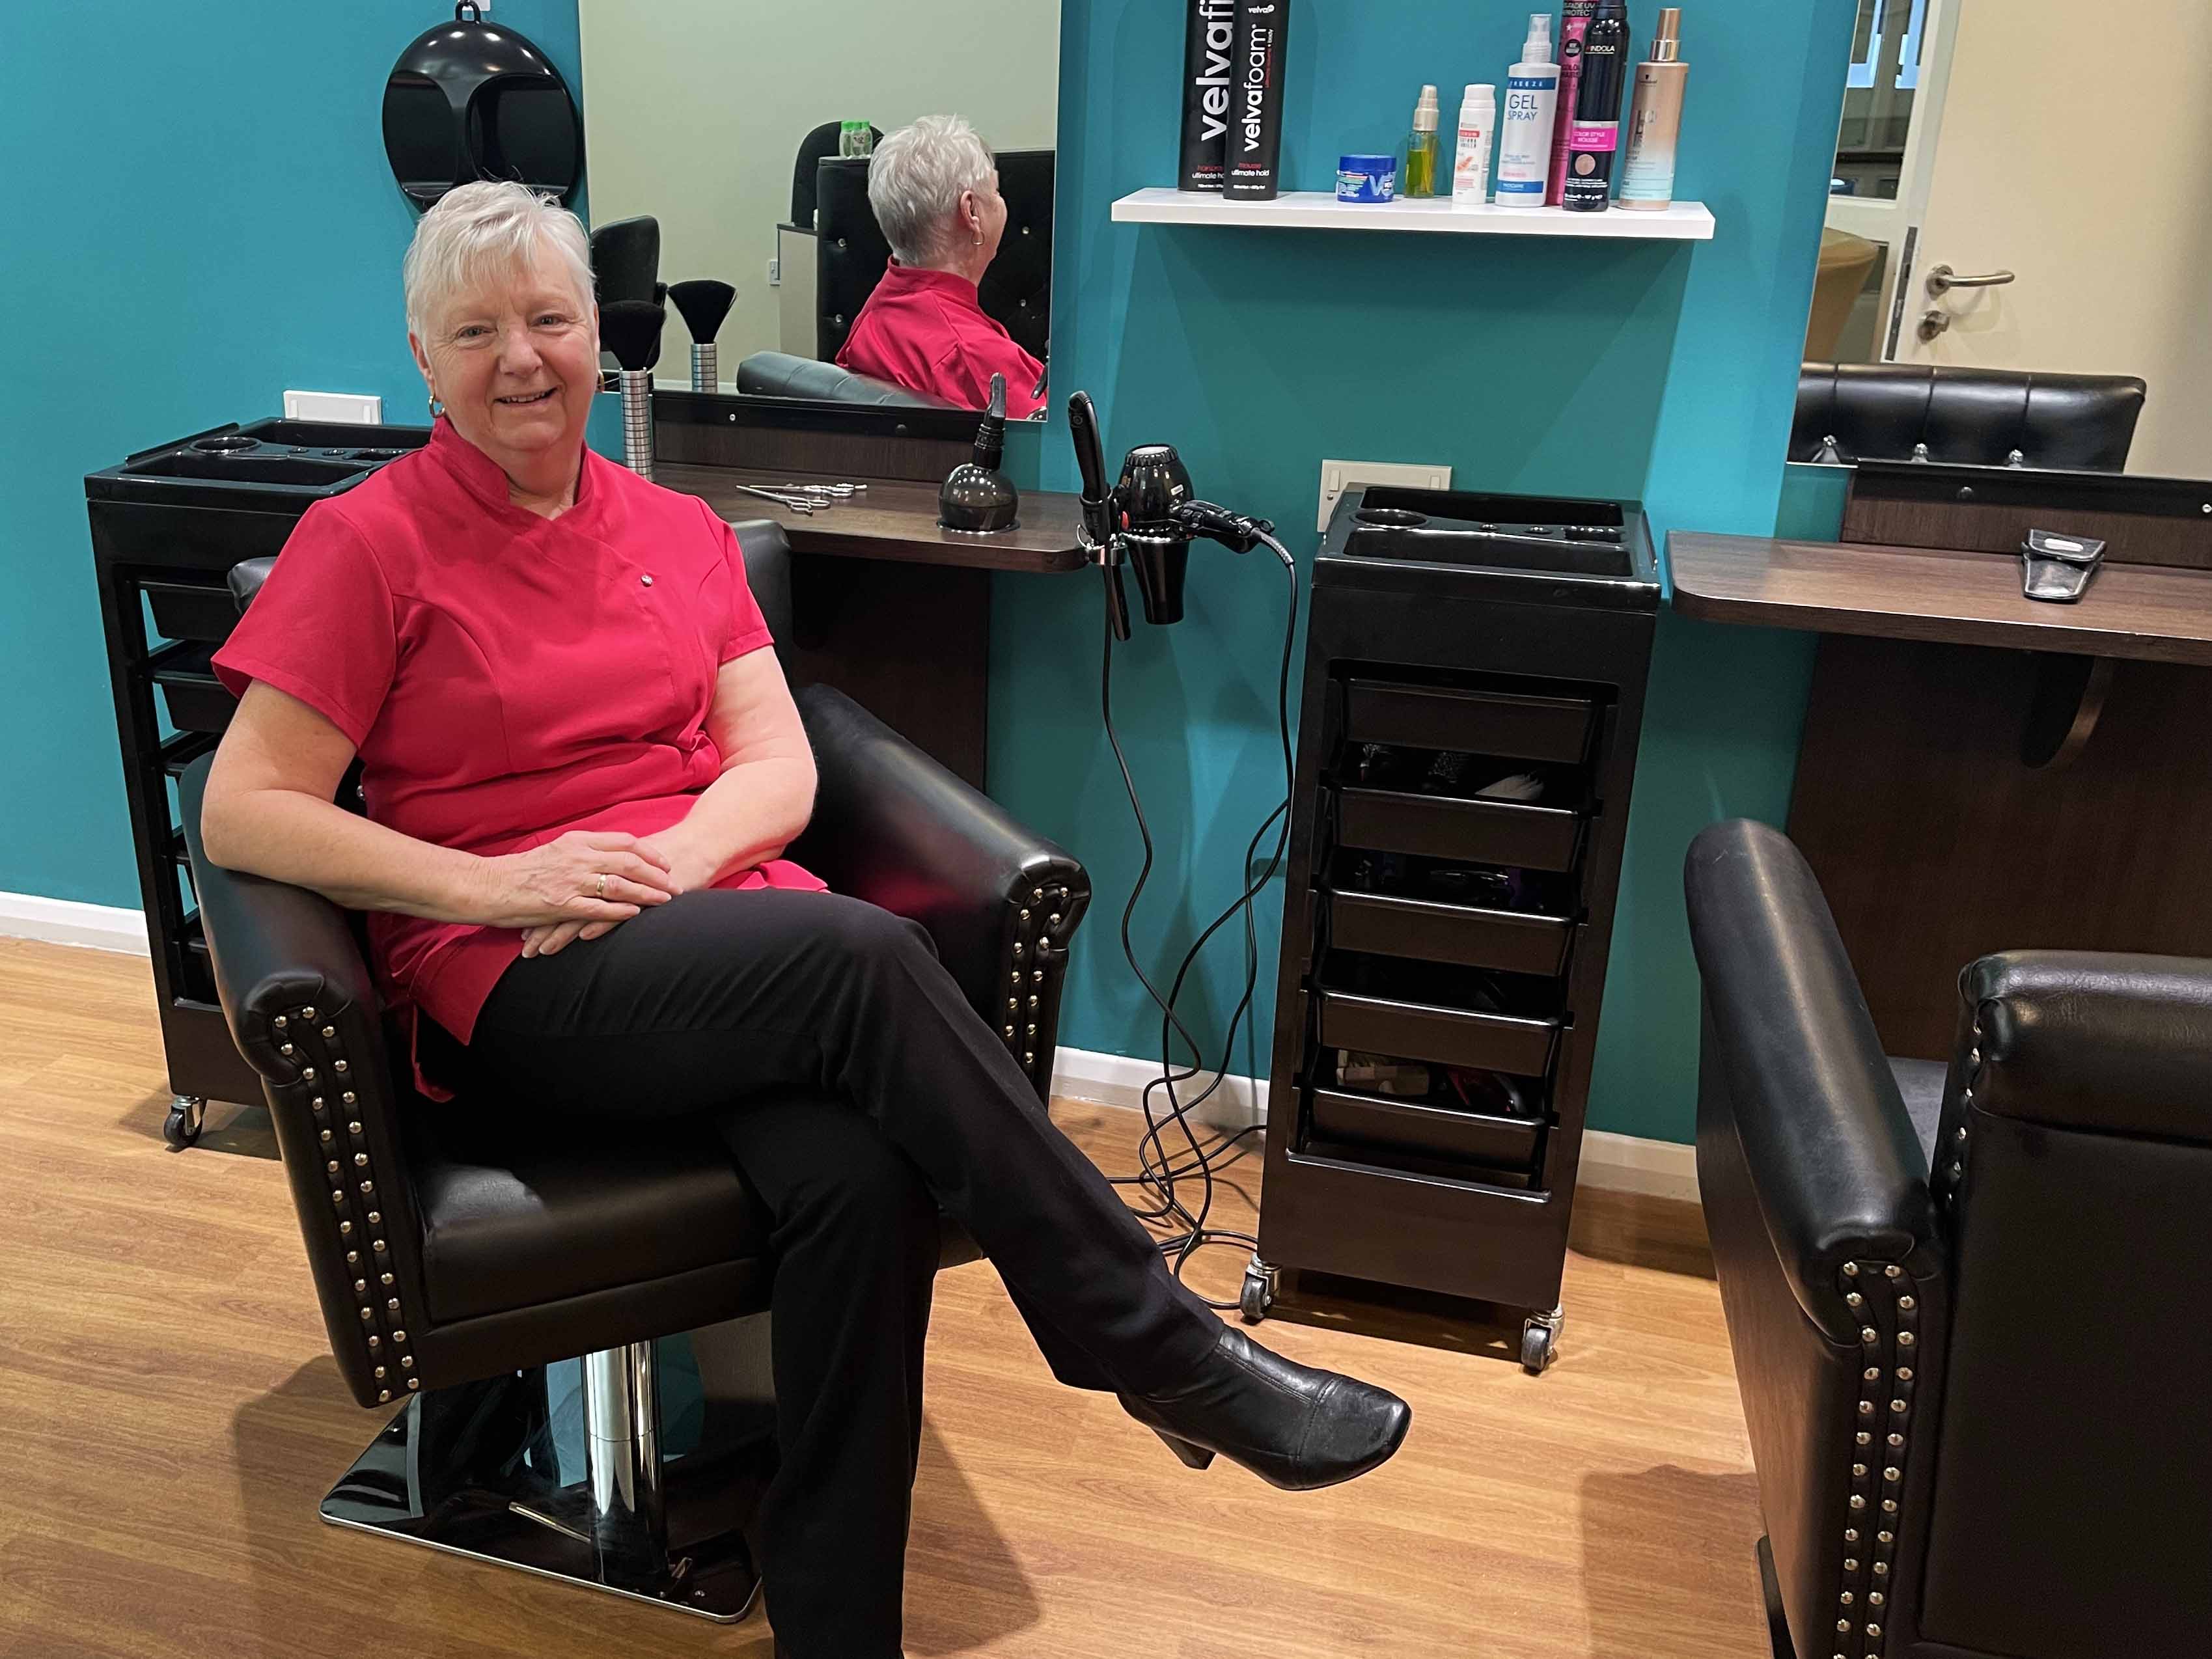 Village hairdresser sat in a hairdressers chair smiling